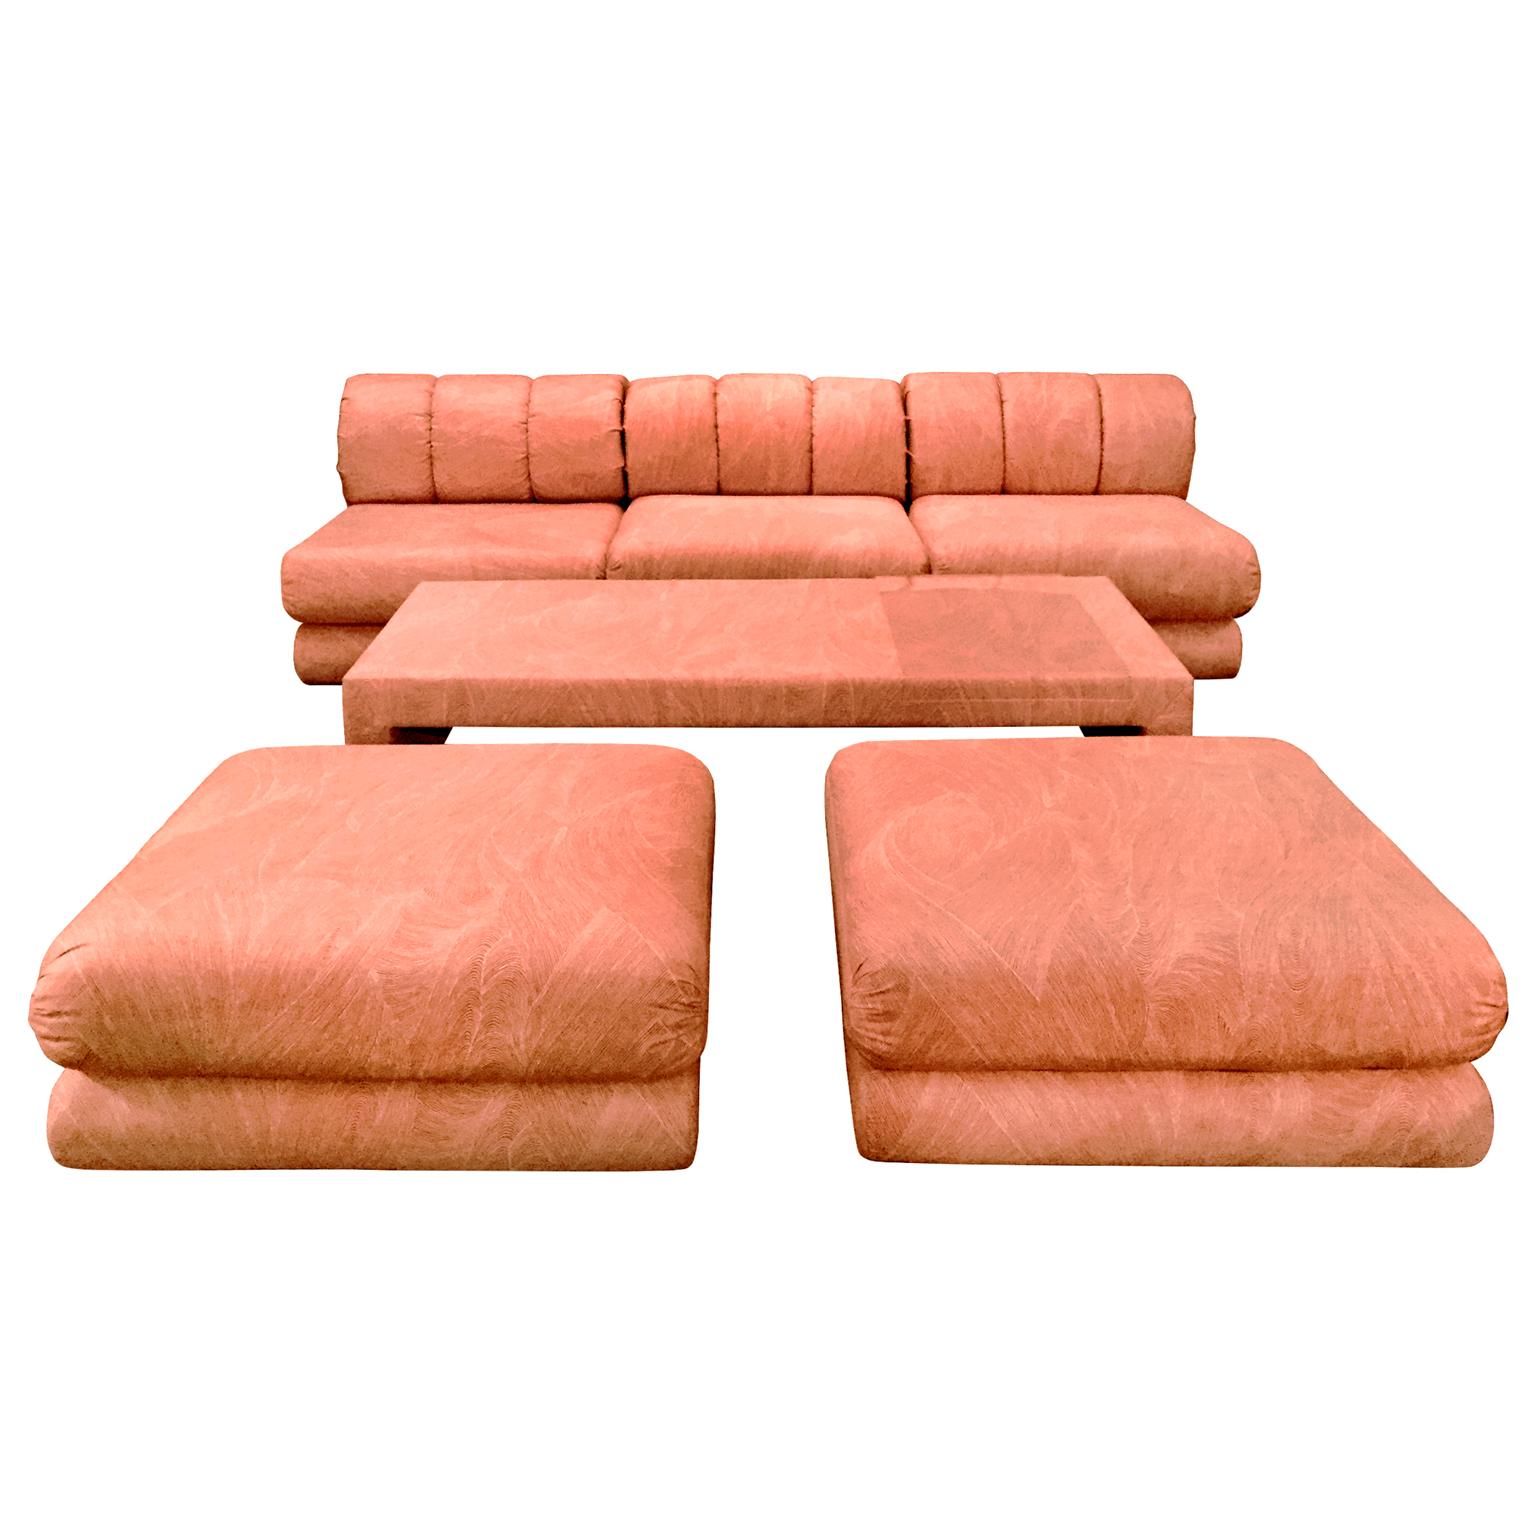 6 Piece Sectional Sofa Set In Original Coral Frond Pattern Fabric